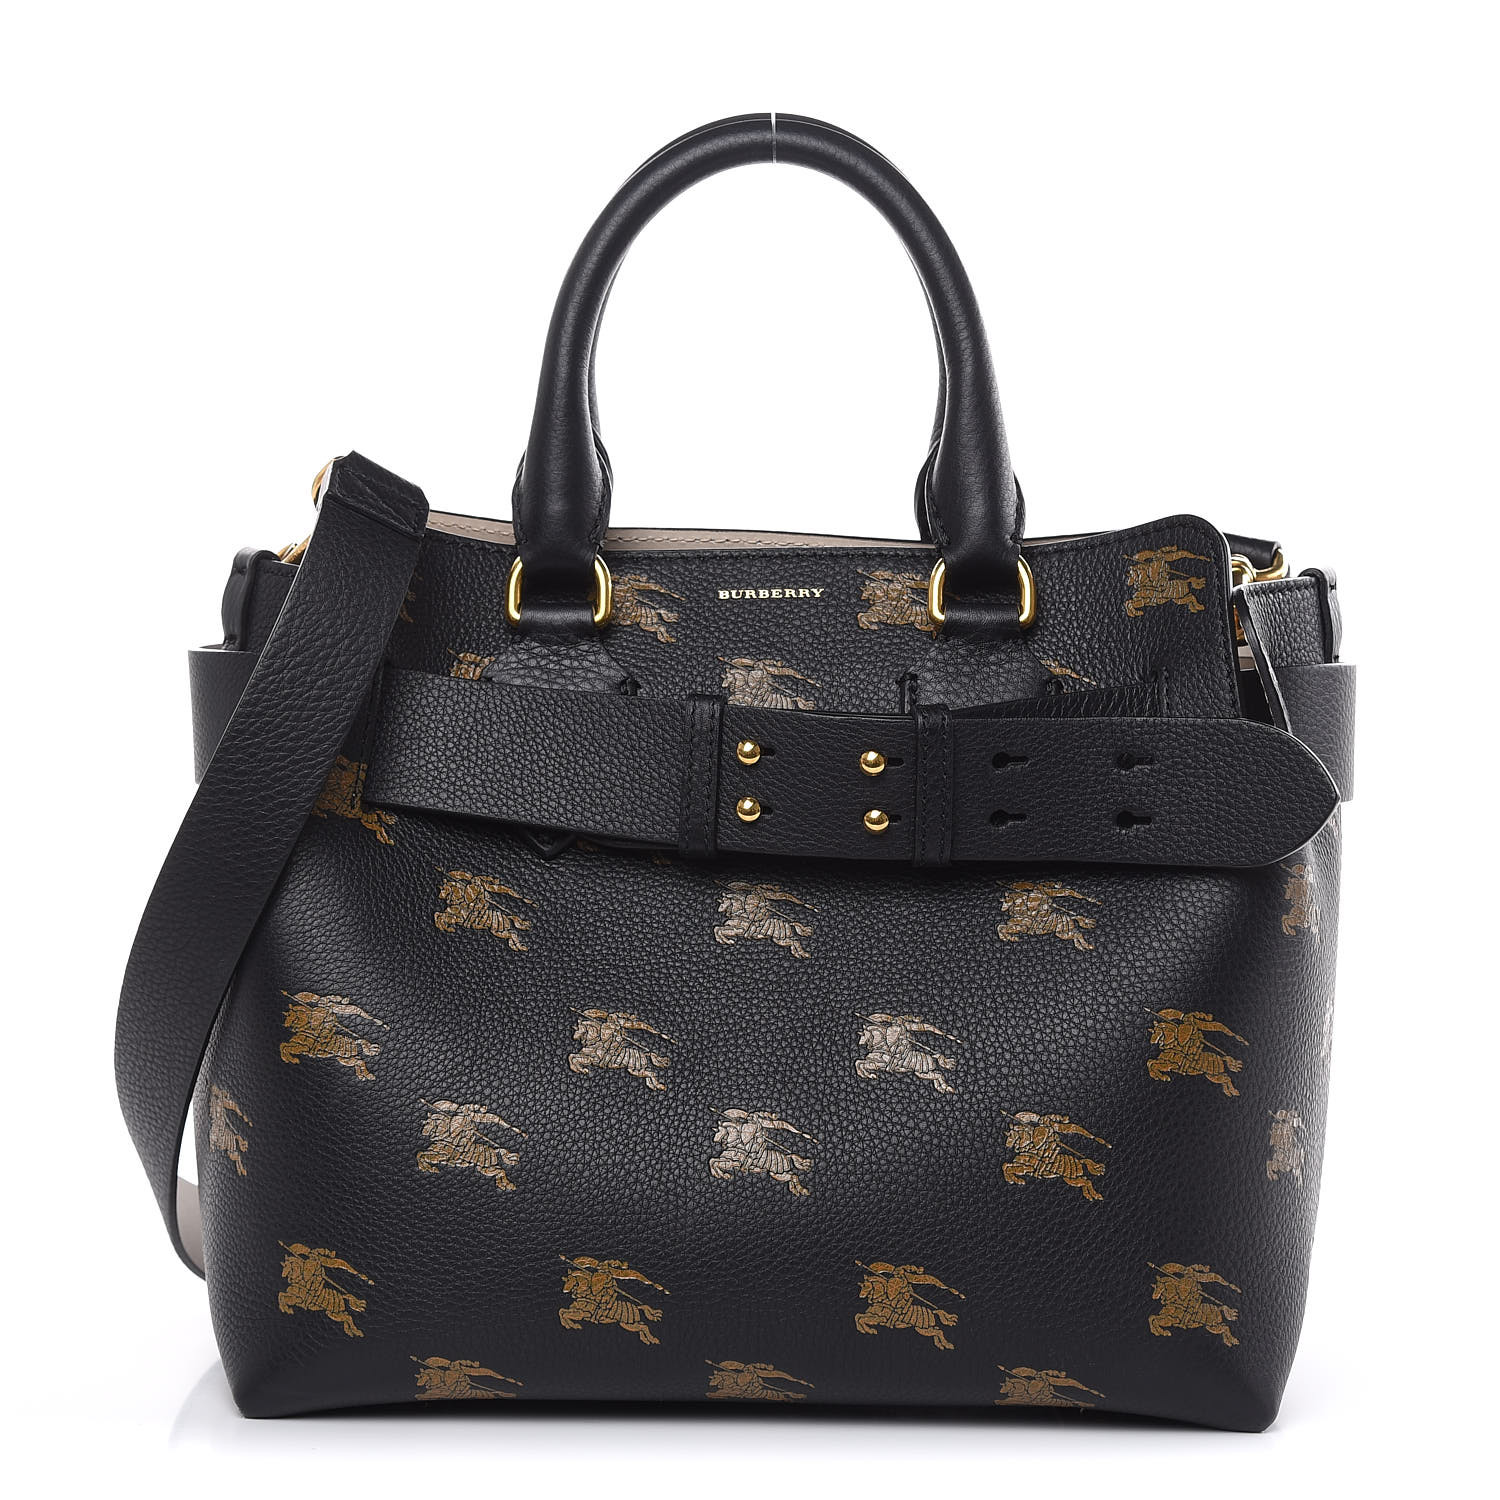 burberry purse with horse